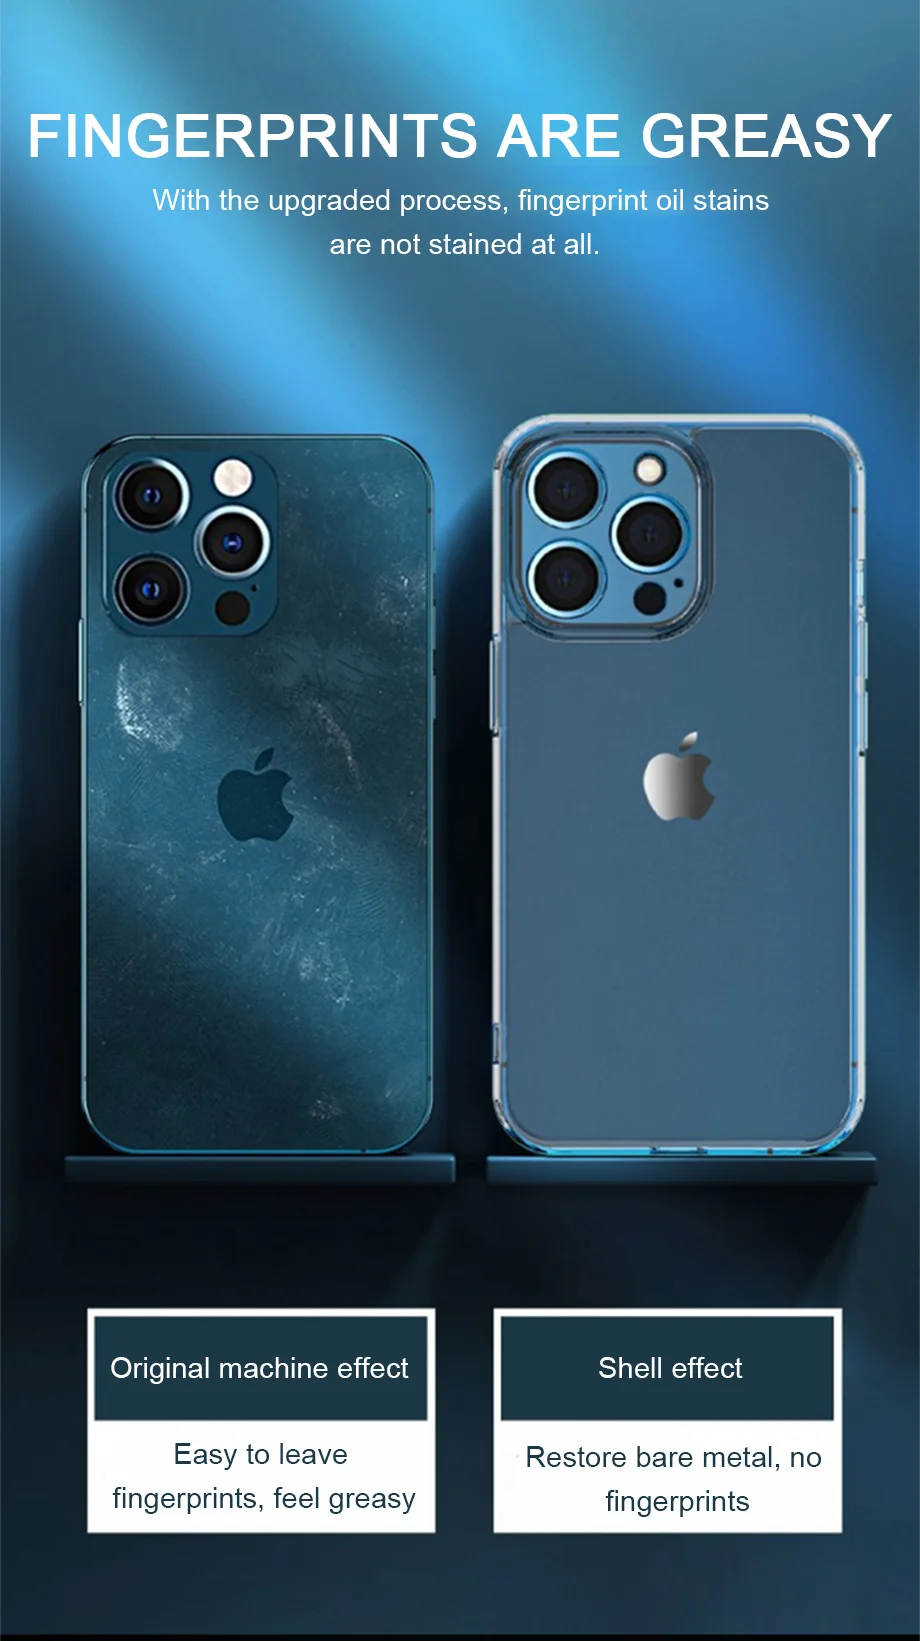 iphone 13 pro phone case Clear Phone Case For iPhone 11 7 8 XR Case Silicone Soft Cover For iPhone 11 12 Mini 13 Pro XS Max X 8 7 6 6s Plus SE 2020 Case iphone 13 pro max case